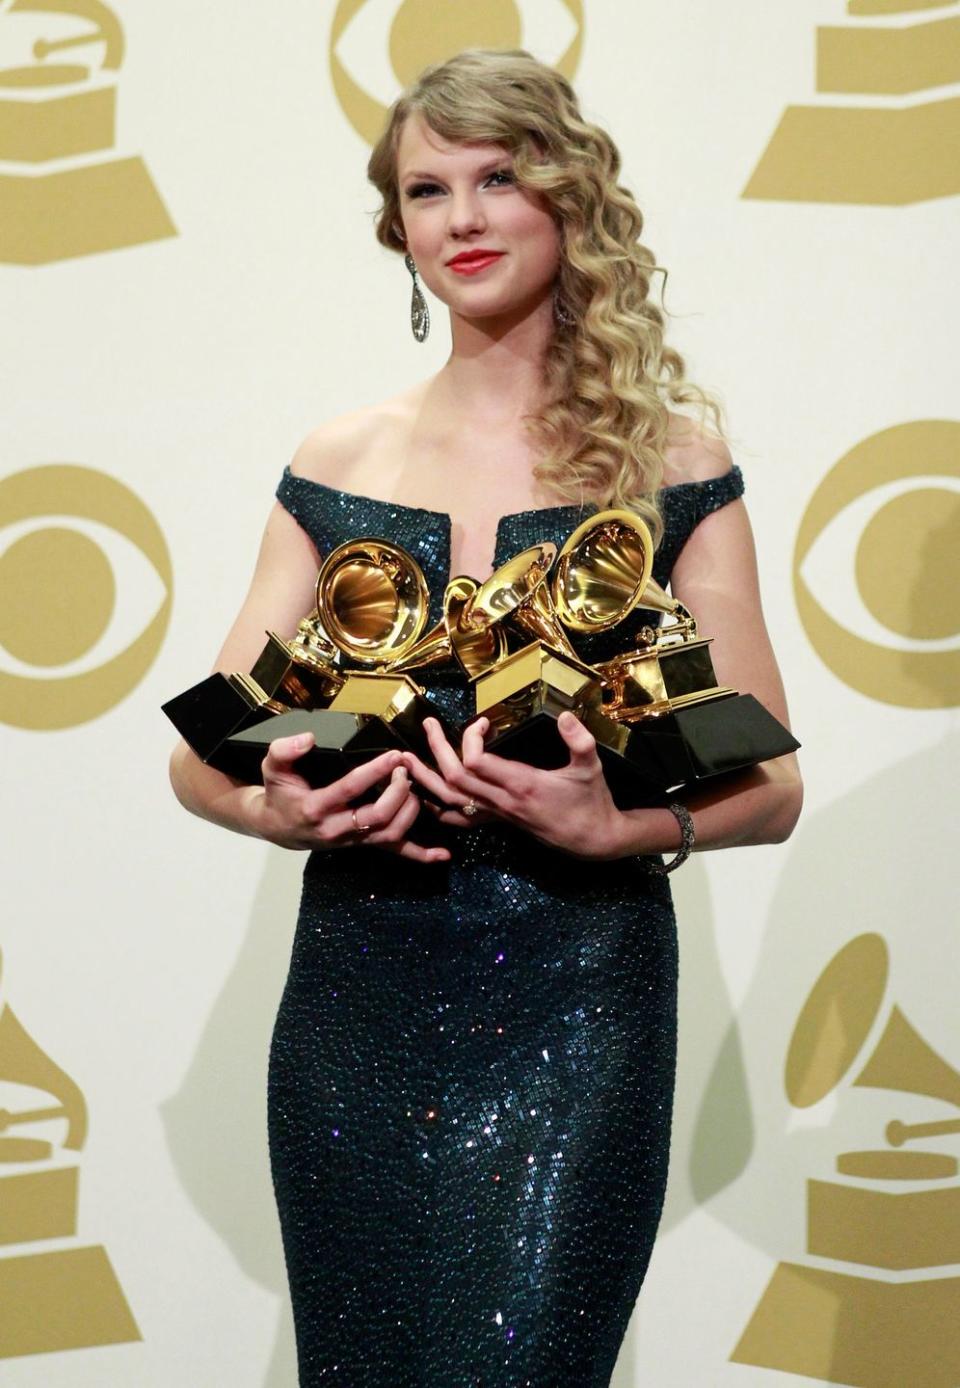 2010: A Whole Lot of Grammys